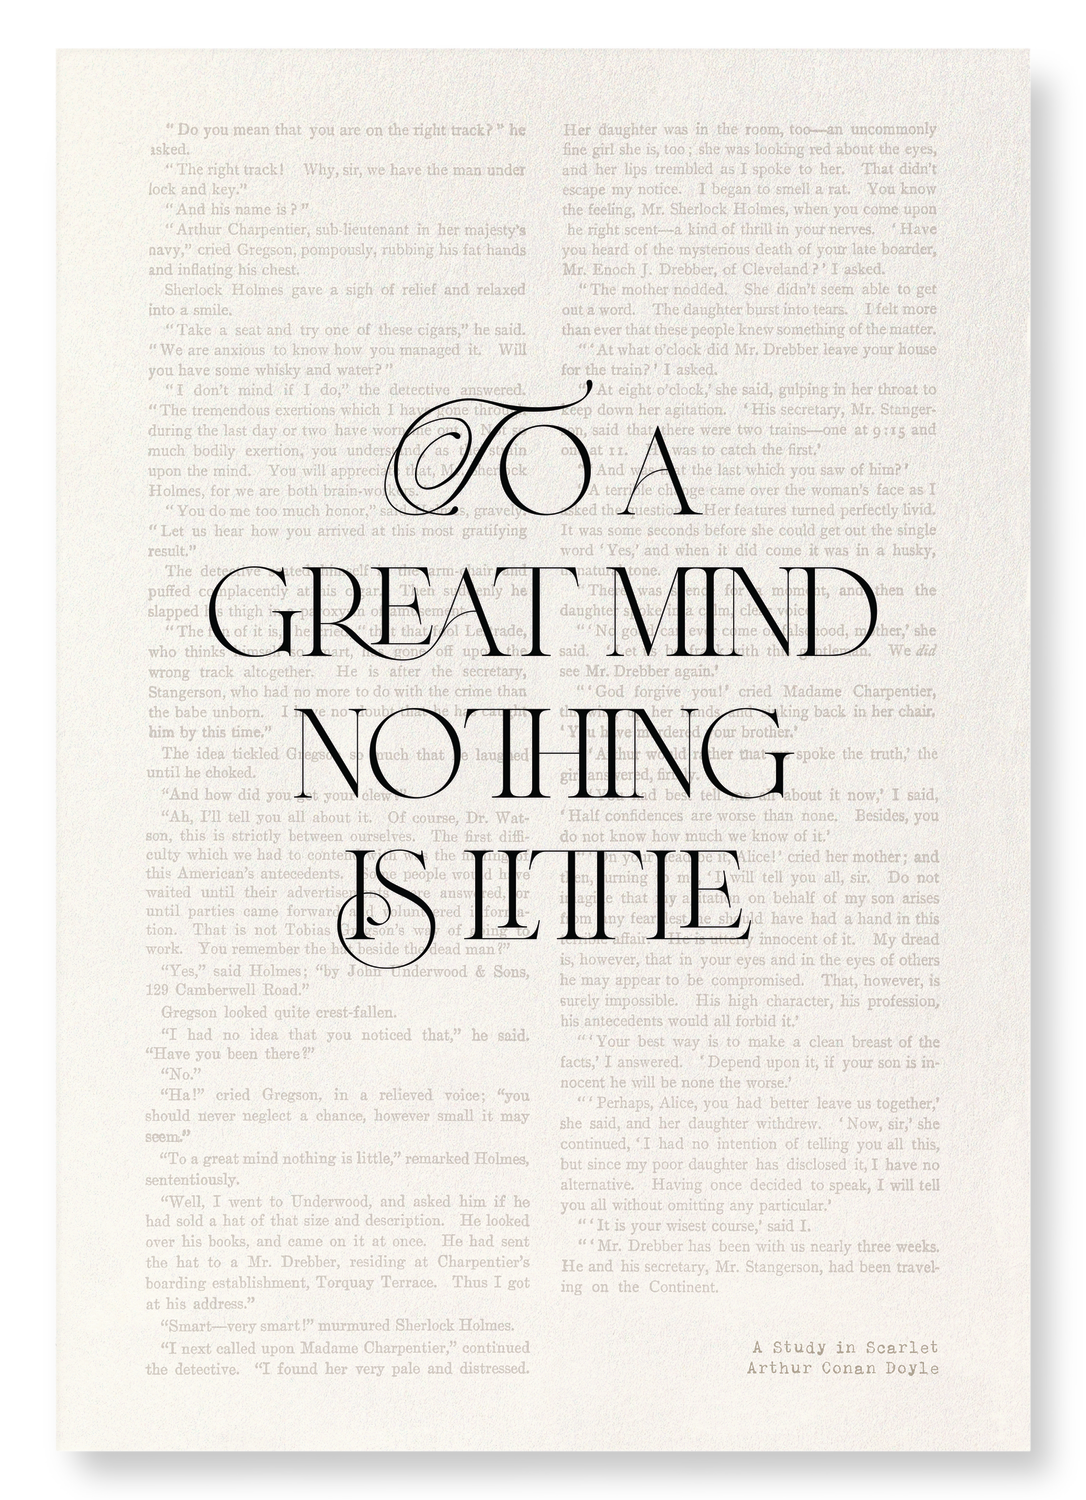 TO A GREAT MIND NOTHING IS LITTLE (1887)